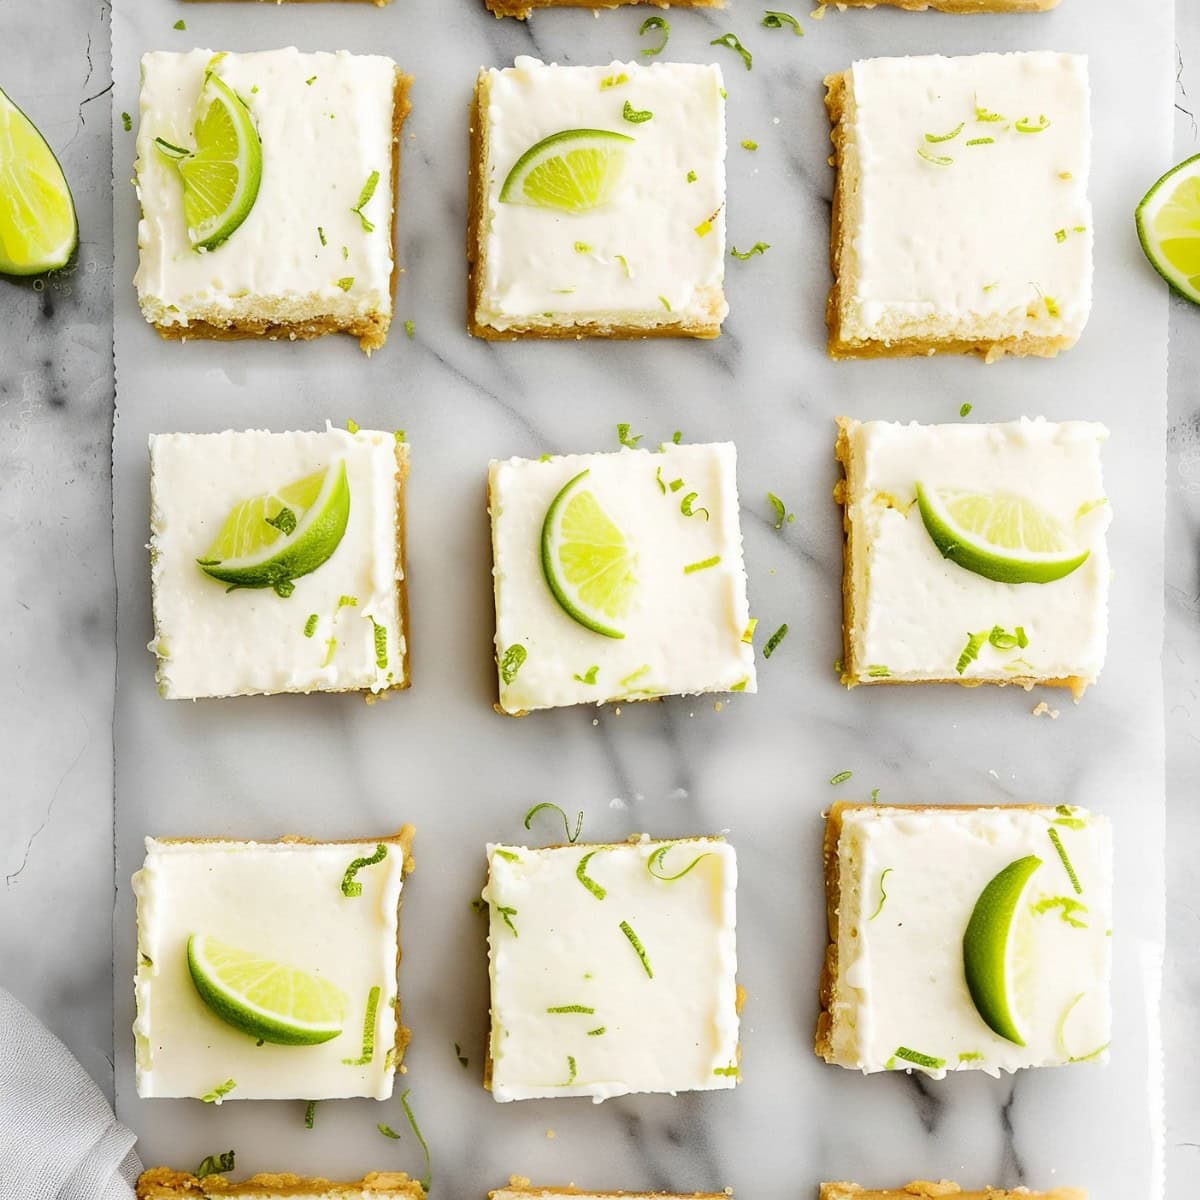 Creamy and silky key lime pie bars on a white marble countertop with lime slices on top, top down view